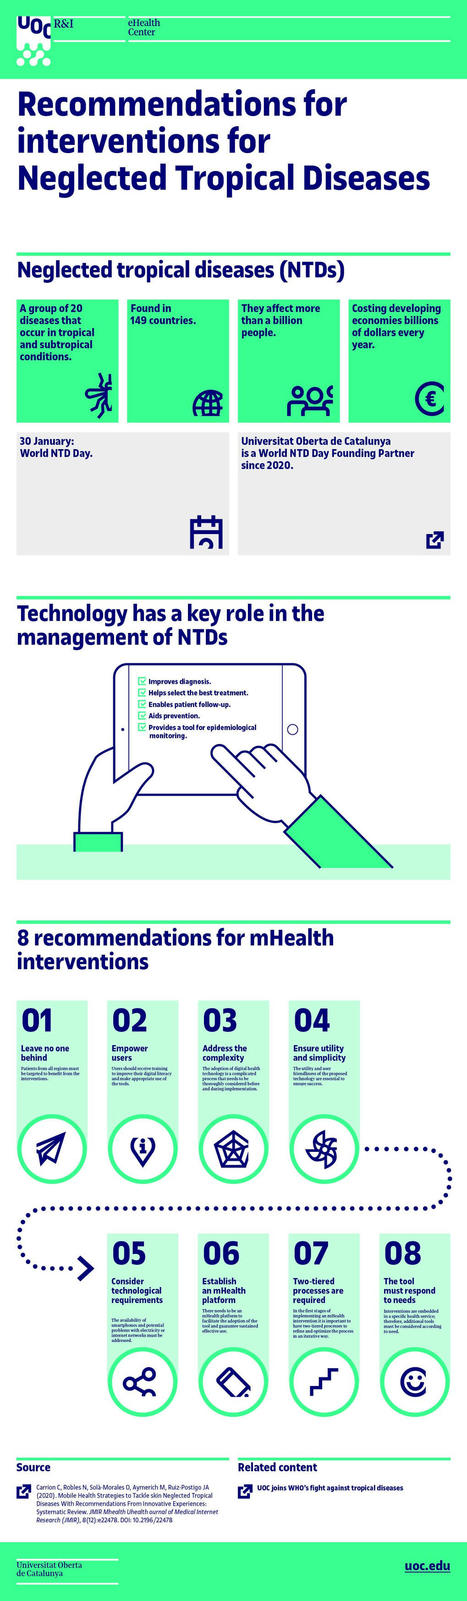 Recommendations to improve apps for neglected tropical diseases | Infectious Diseases | Scoop.it